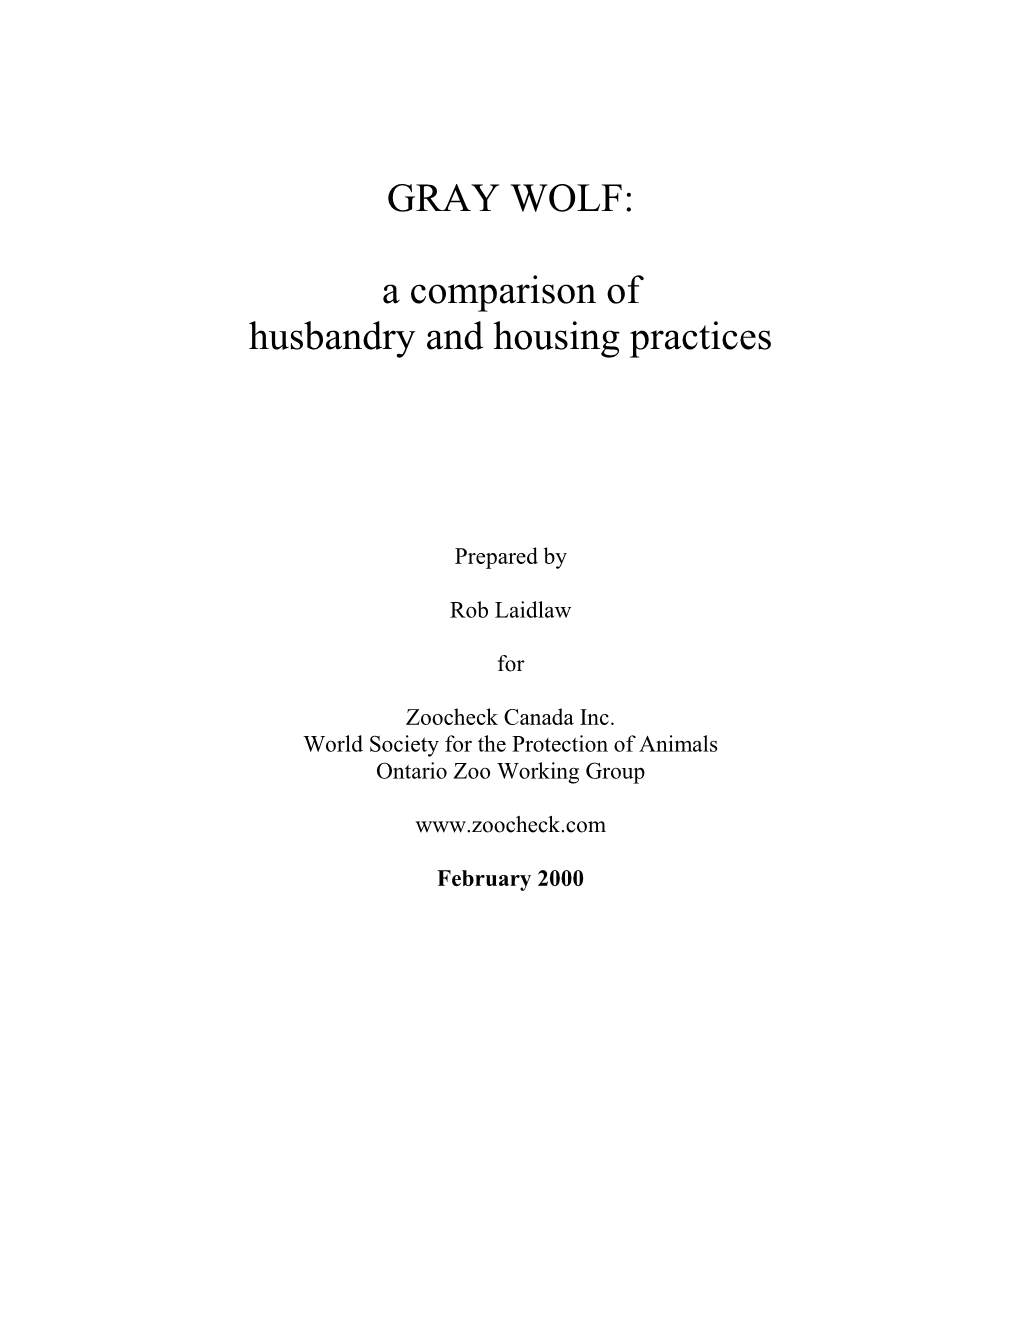 GRAY WOLF: a Comparison of Husbandry and Housing Practices 1 PREAMBLE